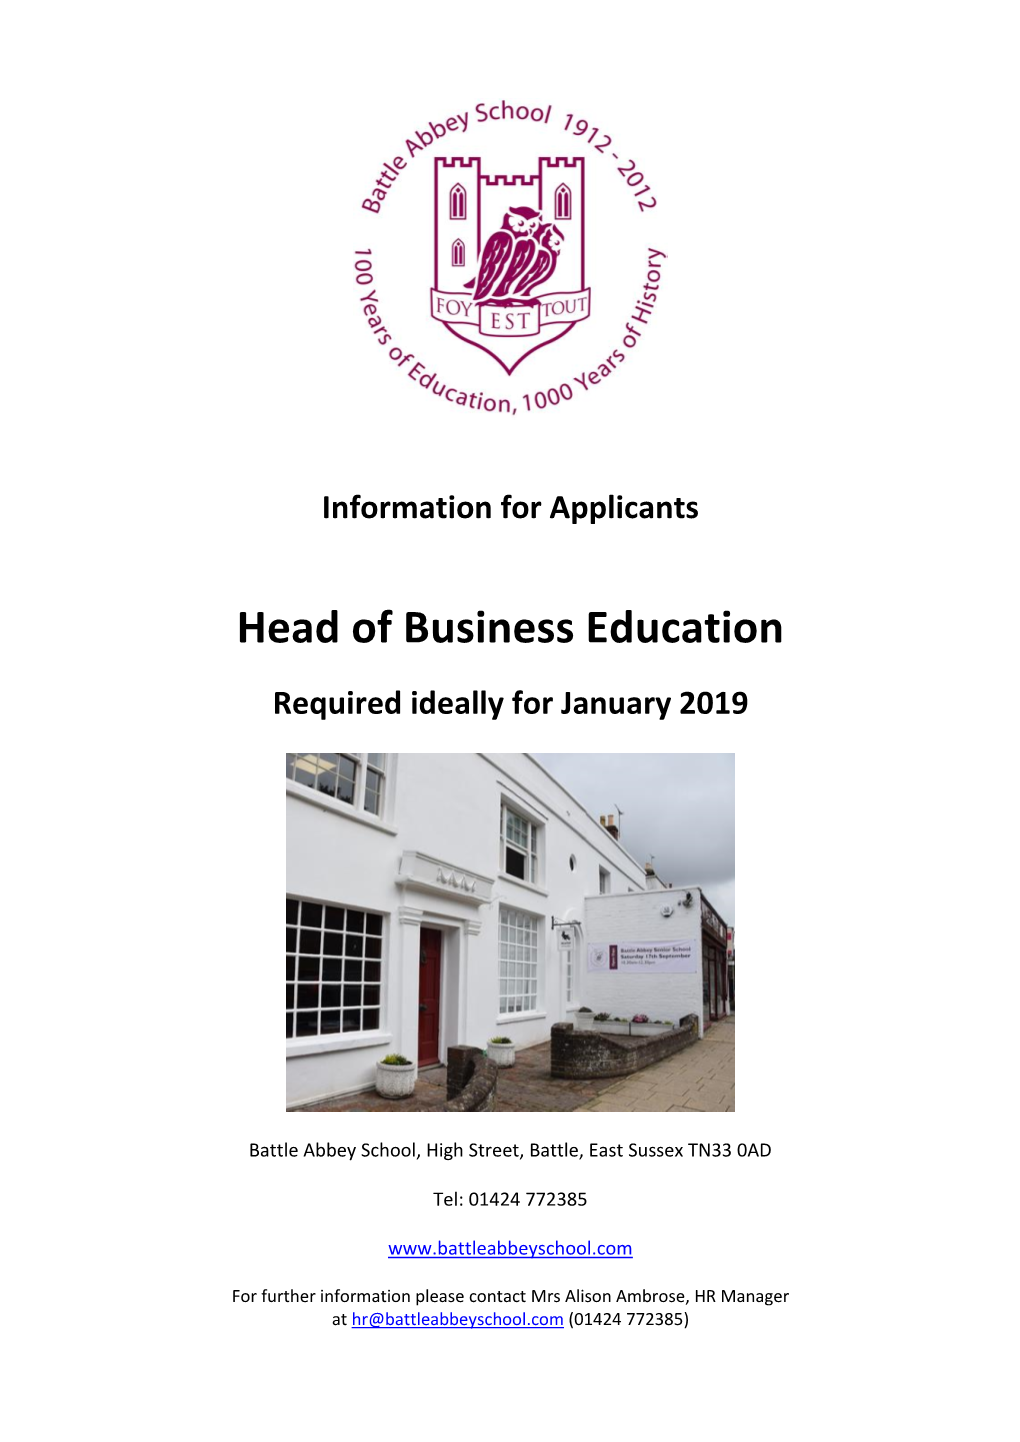 Head of Business Education Required Ideally for January 2019